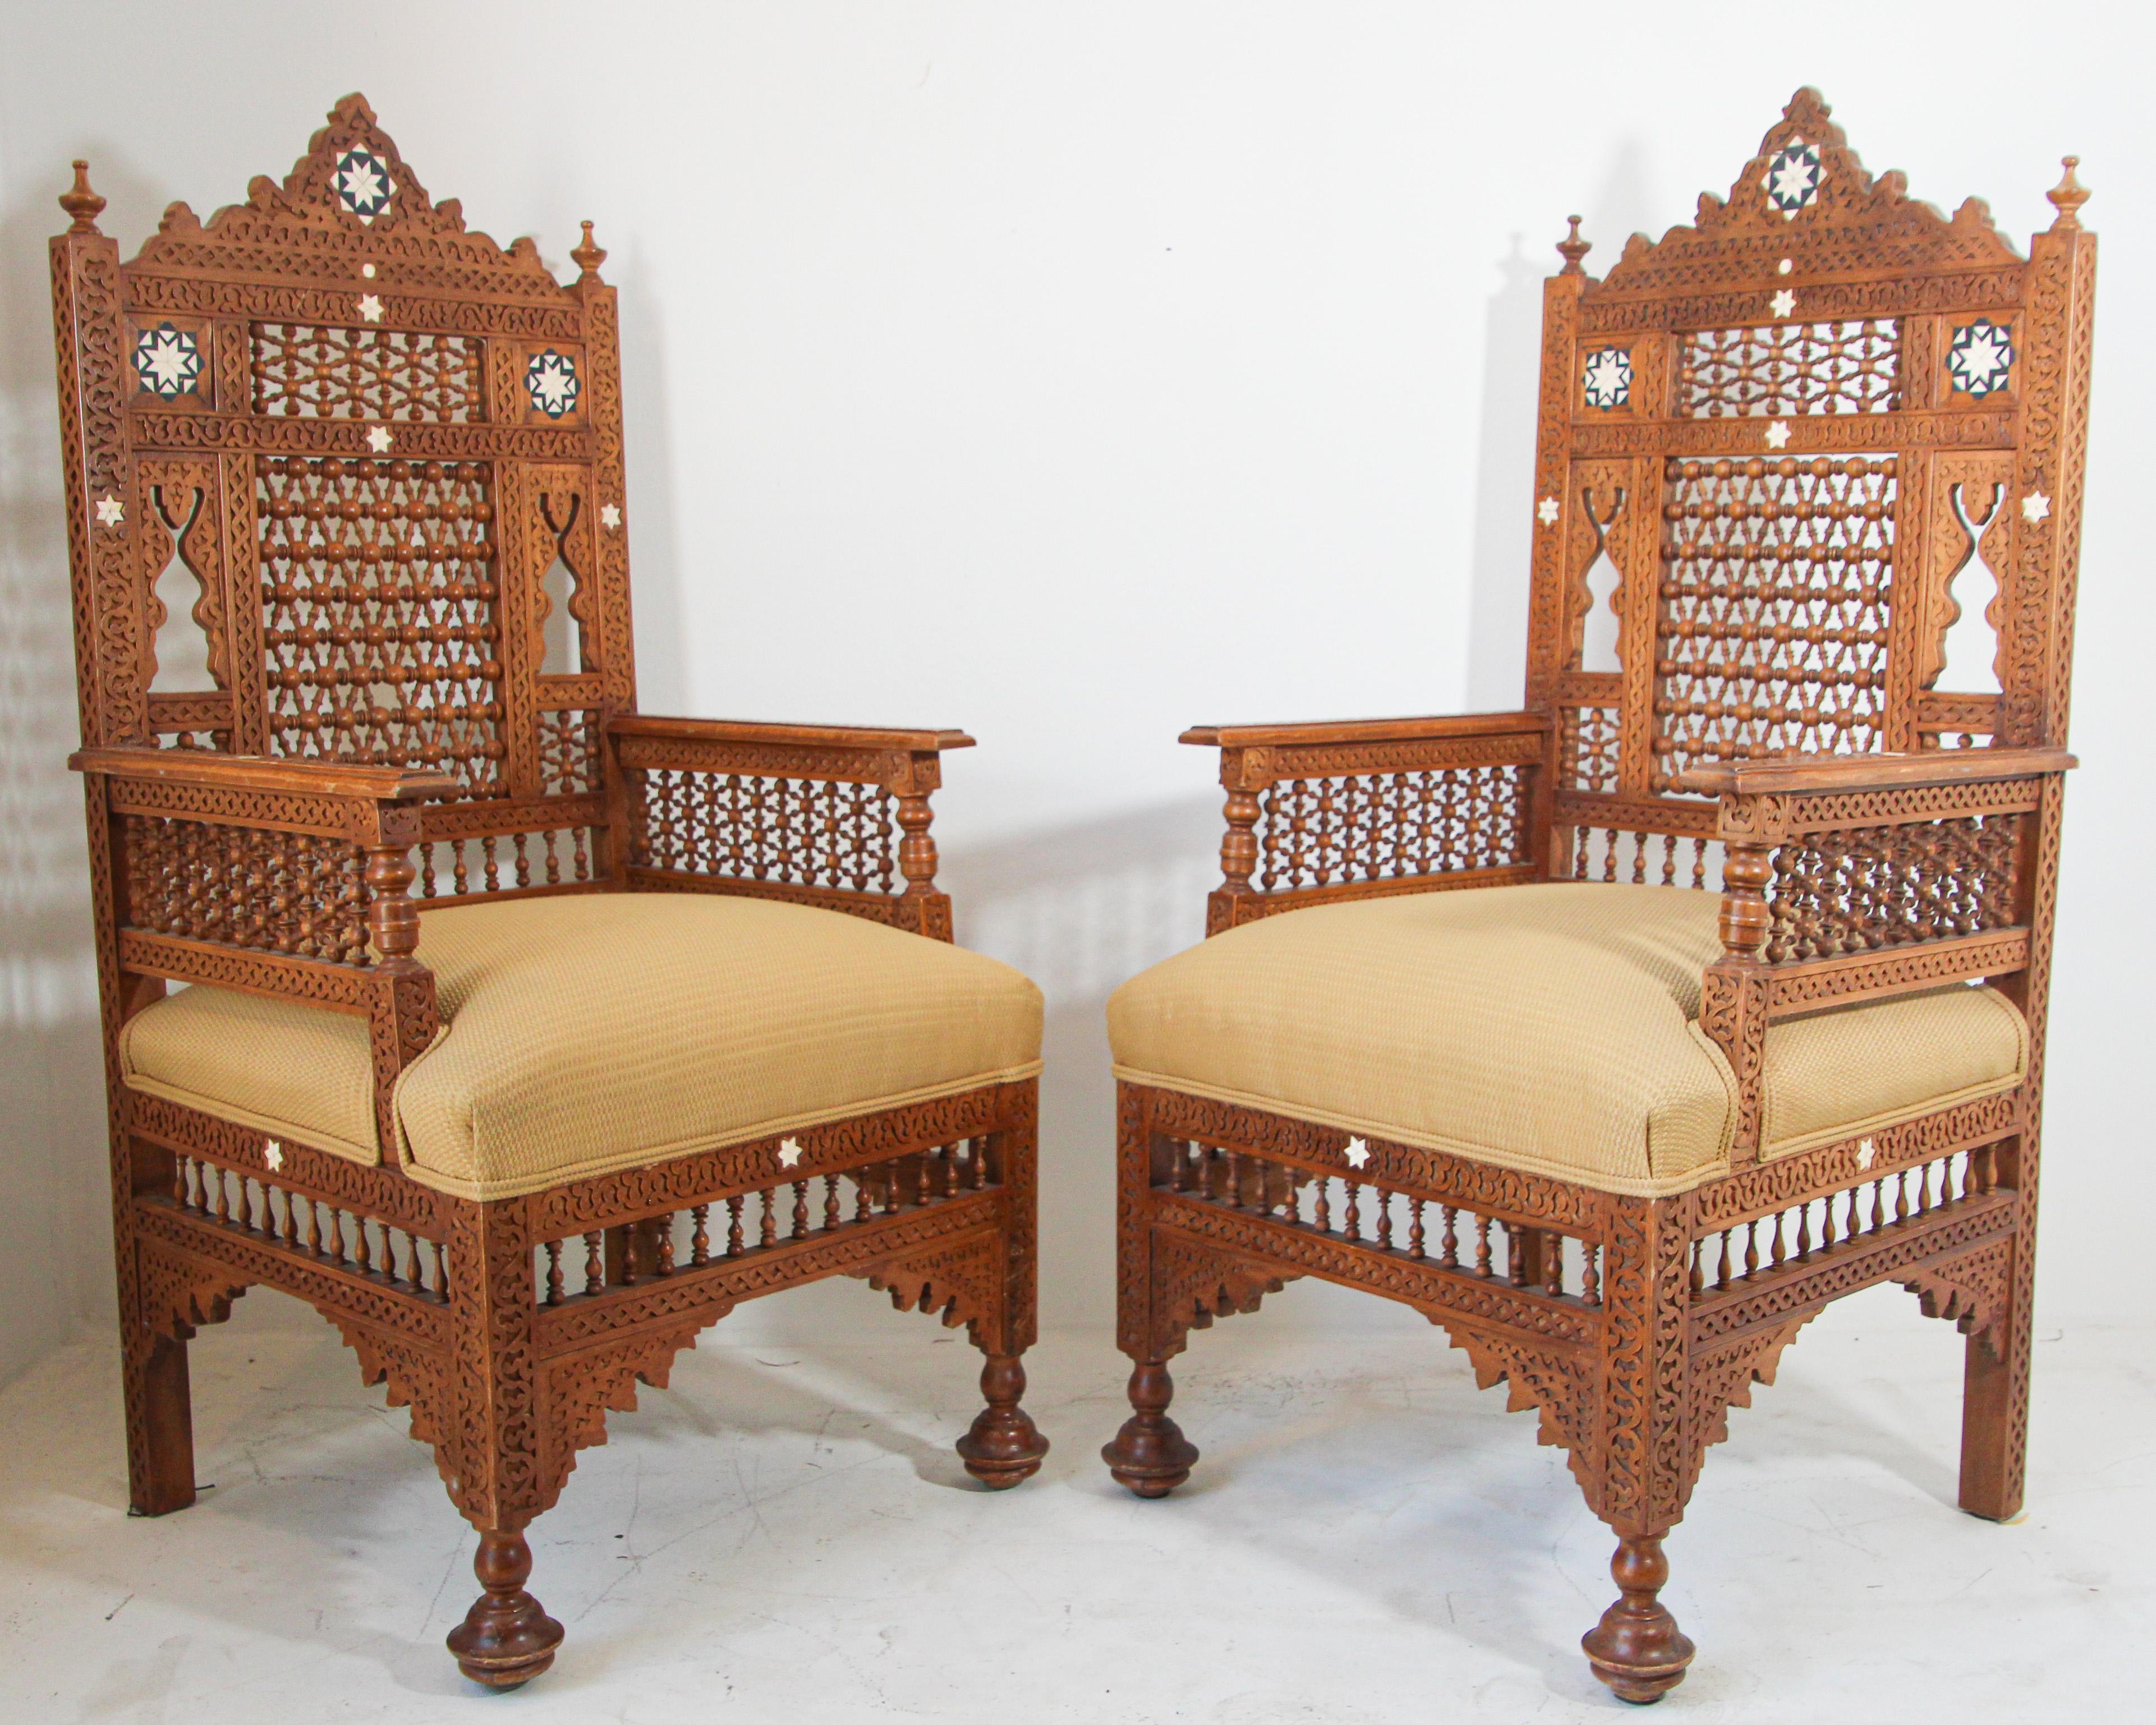 Middle Eastern Egyptian Moorish Royal Throne Armchairs.Large-scale set of two Moorish armchairs, Middle Eastern Arabian style, finely hand-carved.Nice moucharabie designs all-over the chair, newly upholstered with gold Moroccan fabric.Very Fine